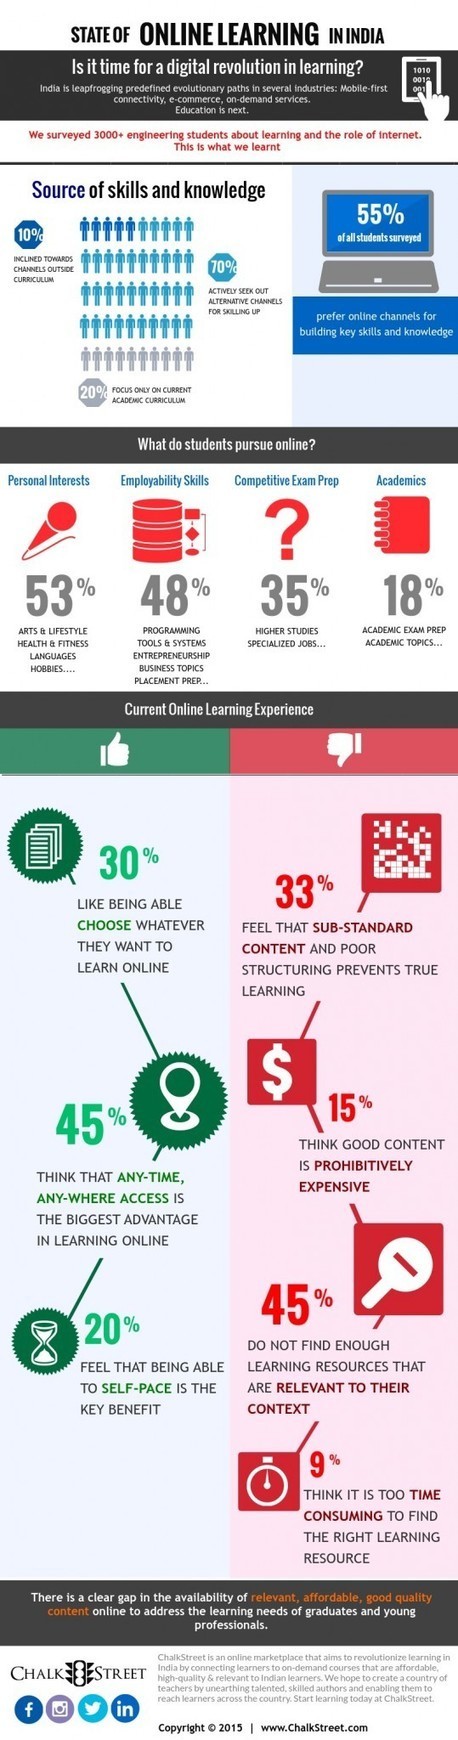 Online Learning in India Infographic | E-Learning-Inclusivo (Mashup) | Scoop.it